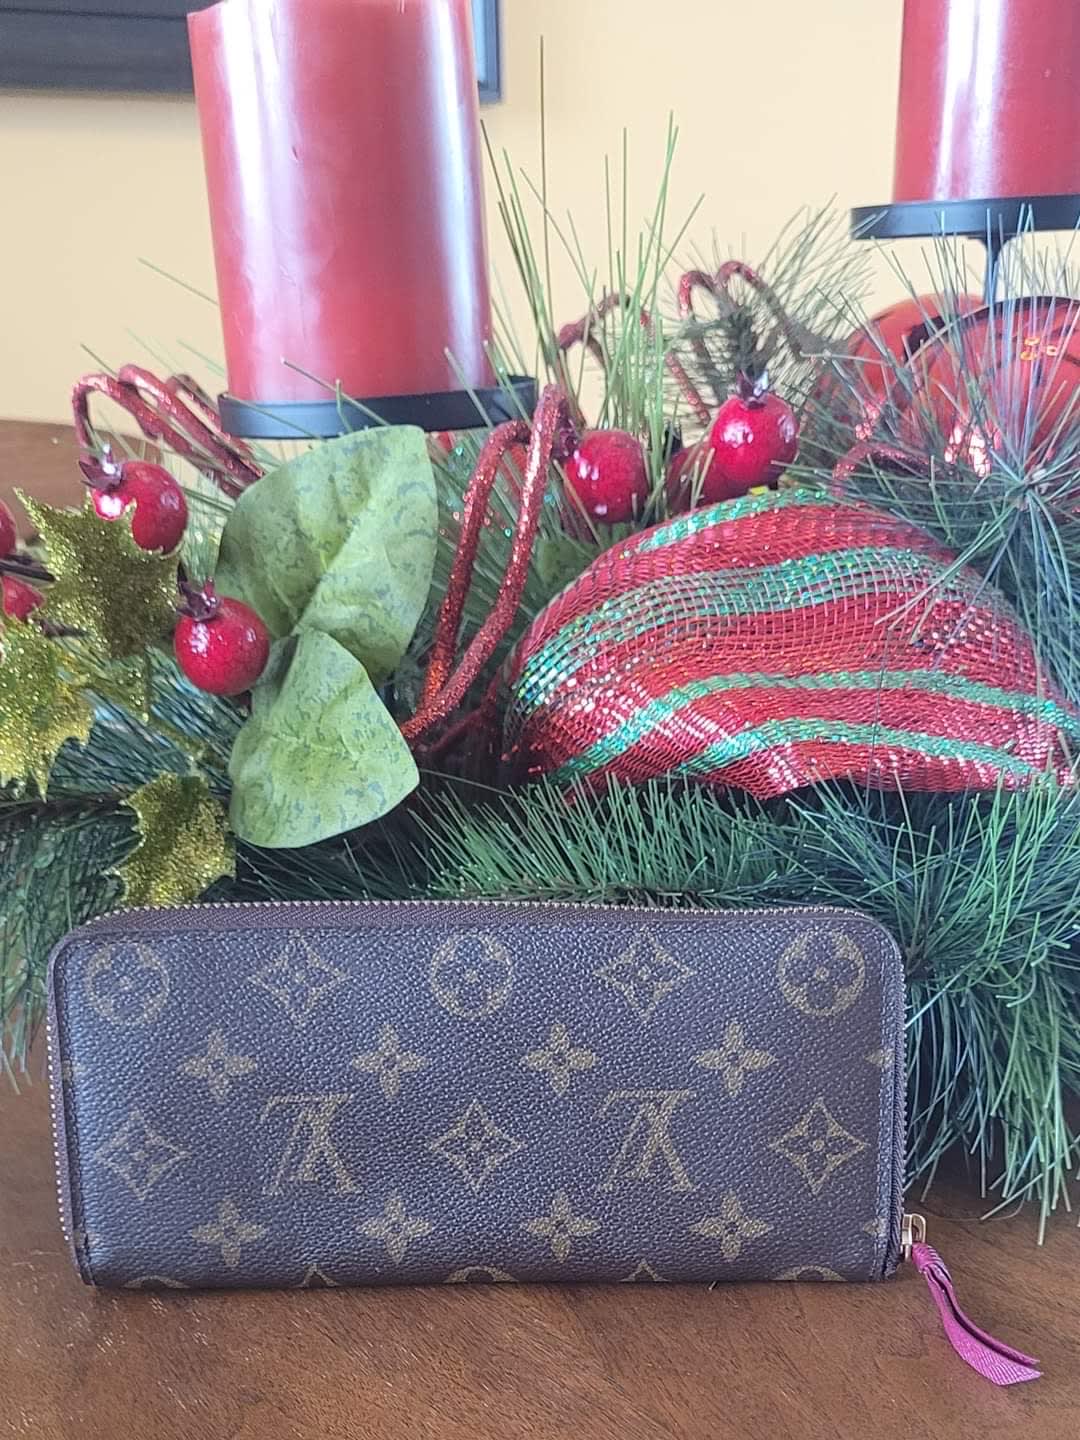 Louis Vuitton Sarah Wallet in Monogram and Fuchsia. LOVE how neat and  organized this …